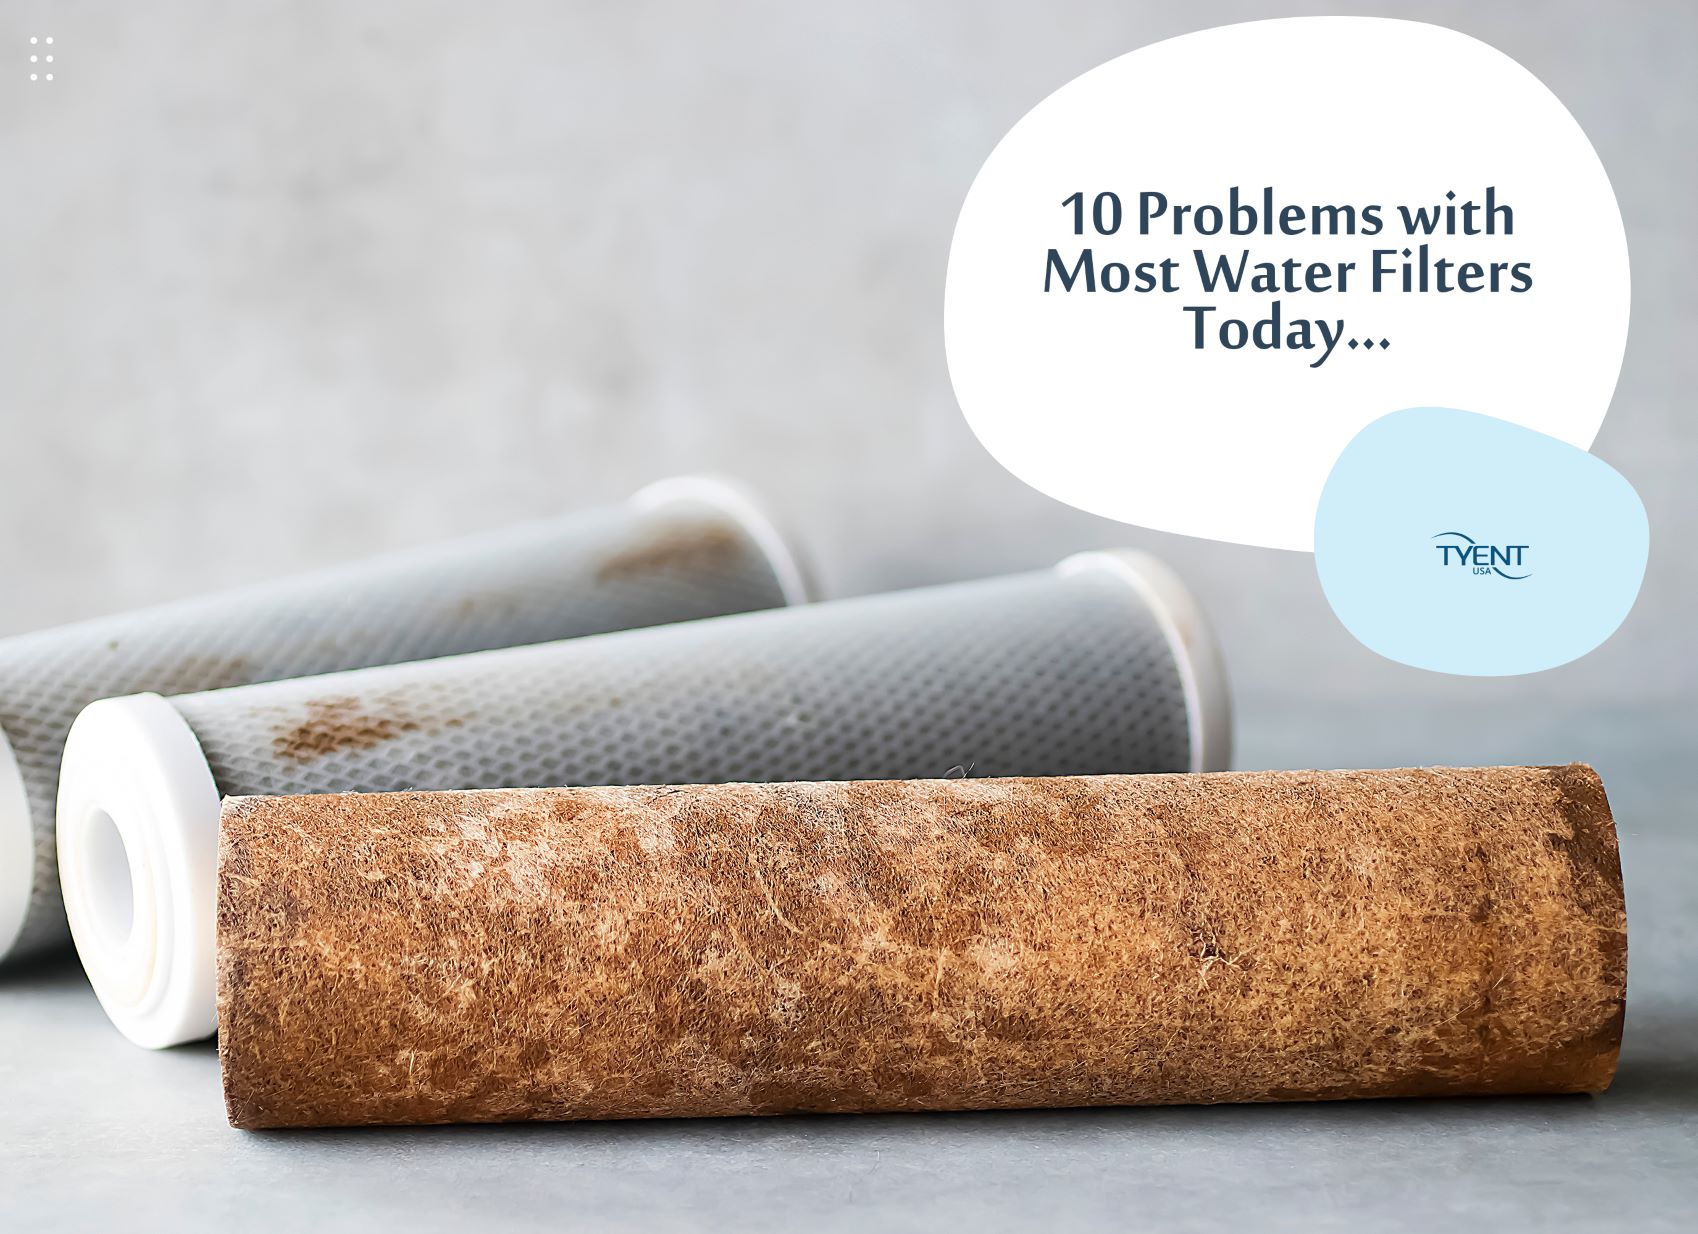 10 Problems with Most Water Filters Today